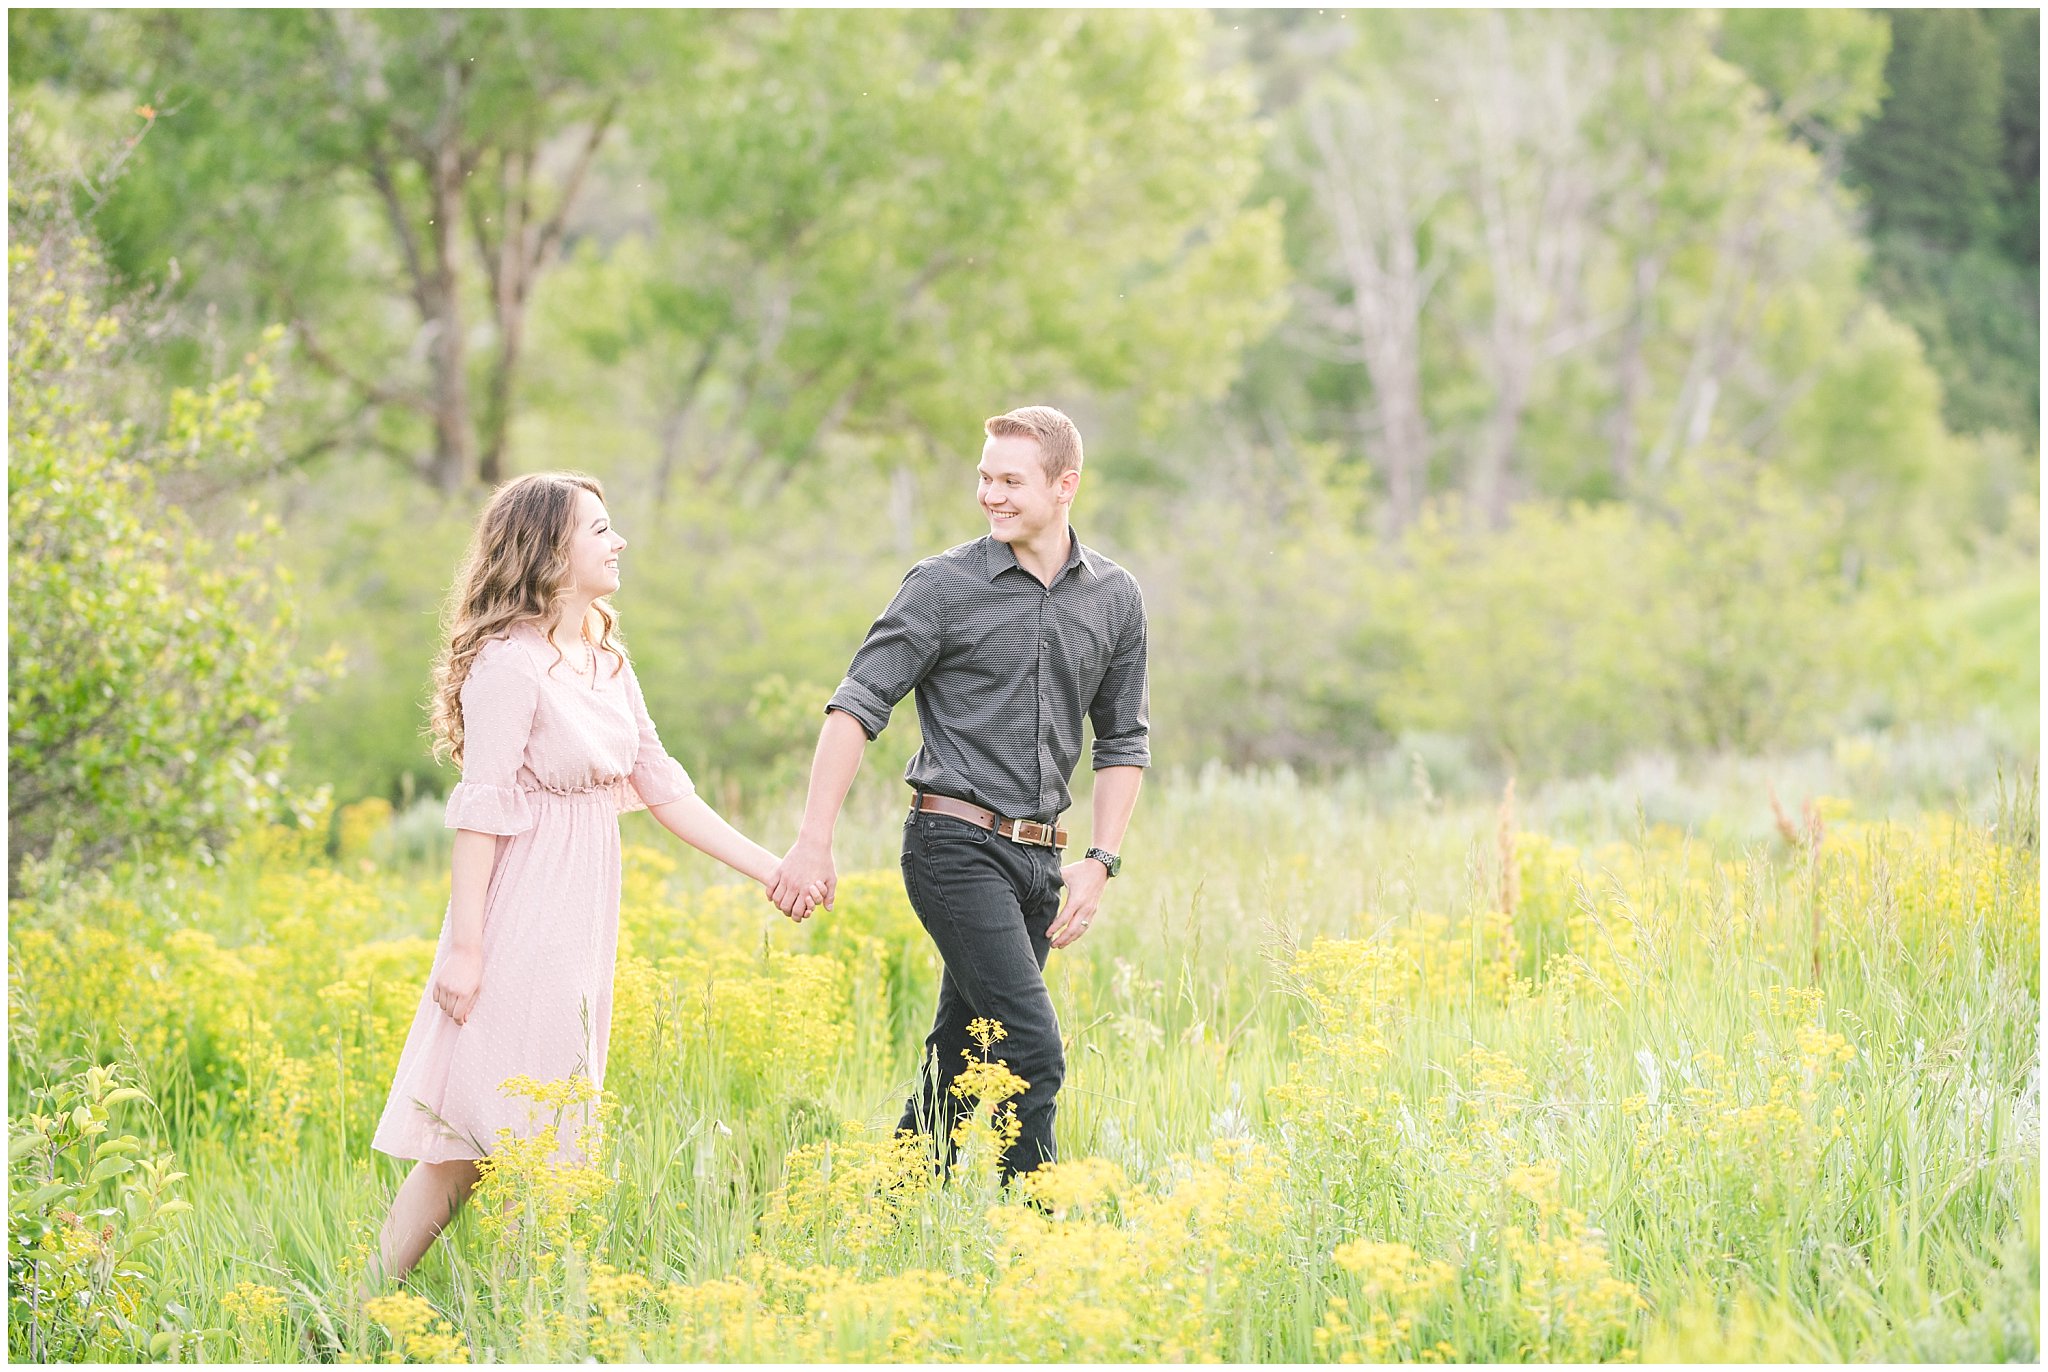 Couple walks through green grasses and yellow wildflowers in the Utah mountains during engagement session | Top Utah Wedding and Couples Photos 2019 | Jessie and Dallin Photography